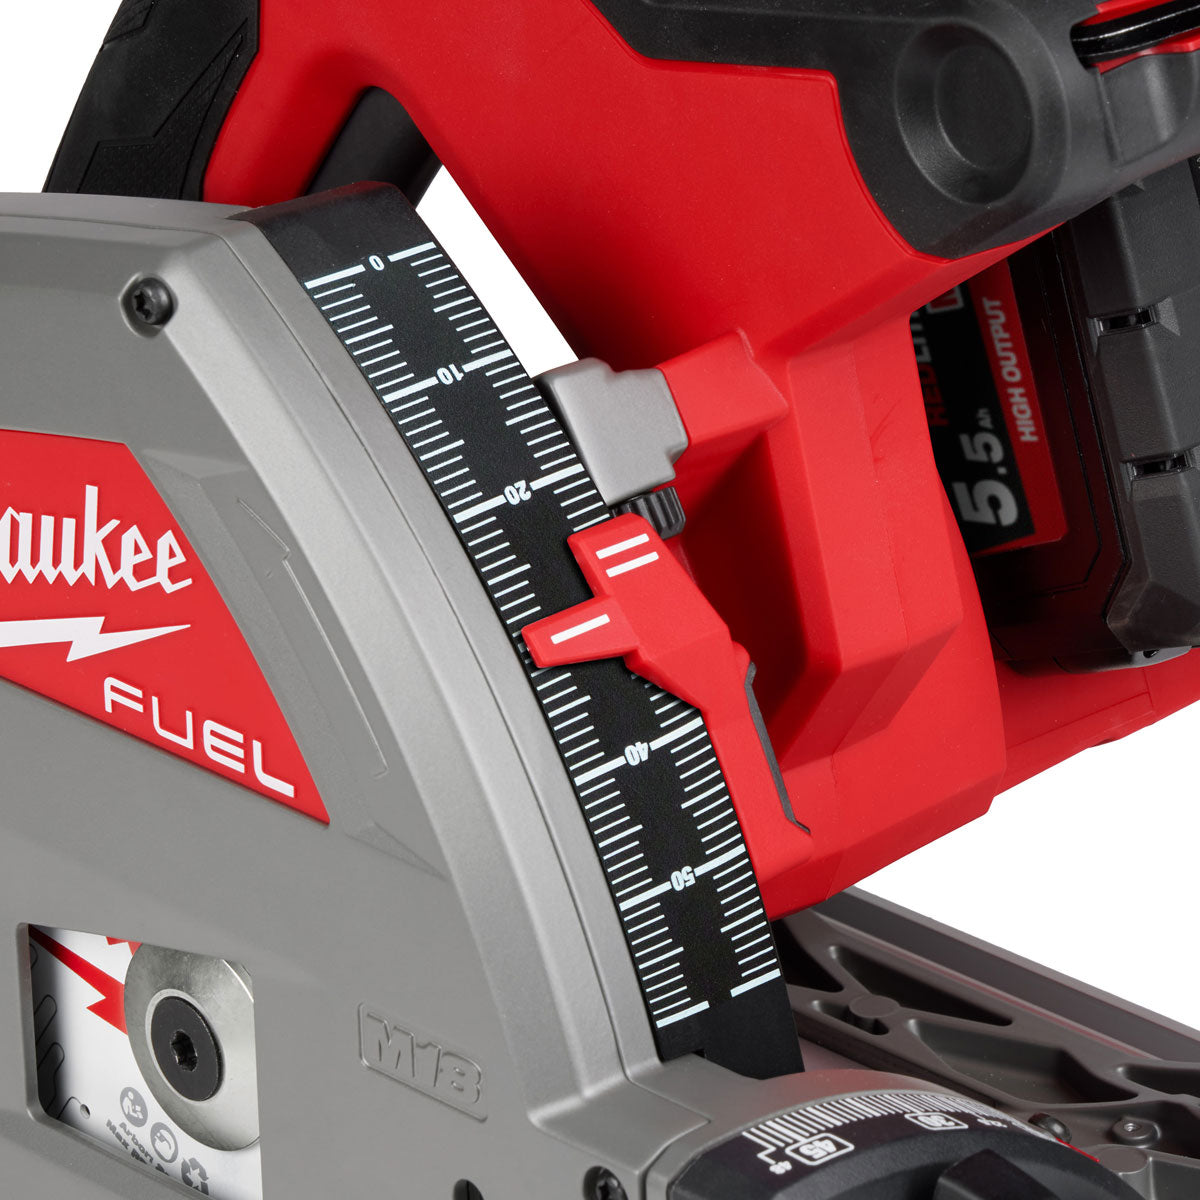 Milwaukee M18FPS55-0P 18V 165mm Fuel Brushless Plunge Saw with 2 x 5.5Ah Battery & Guide Rail Kit